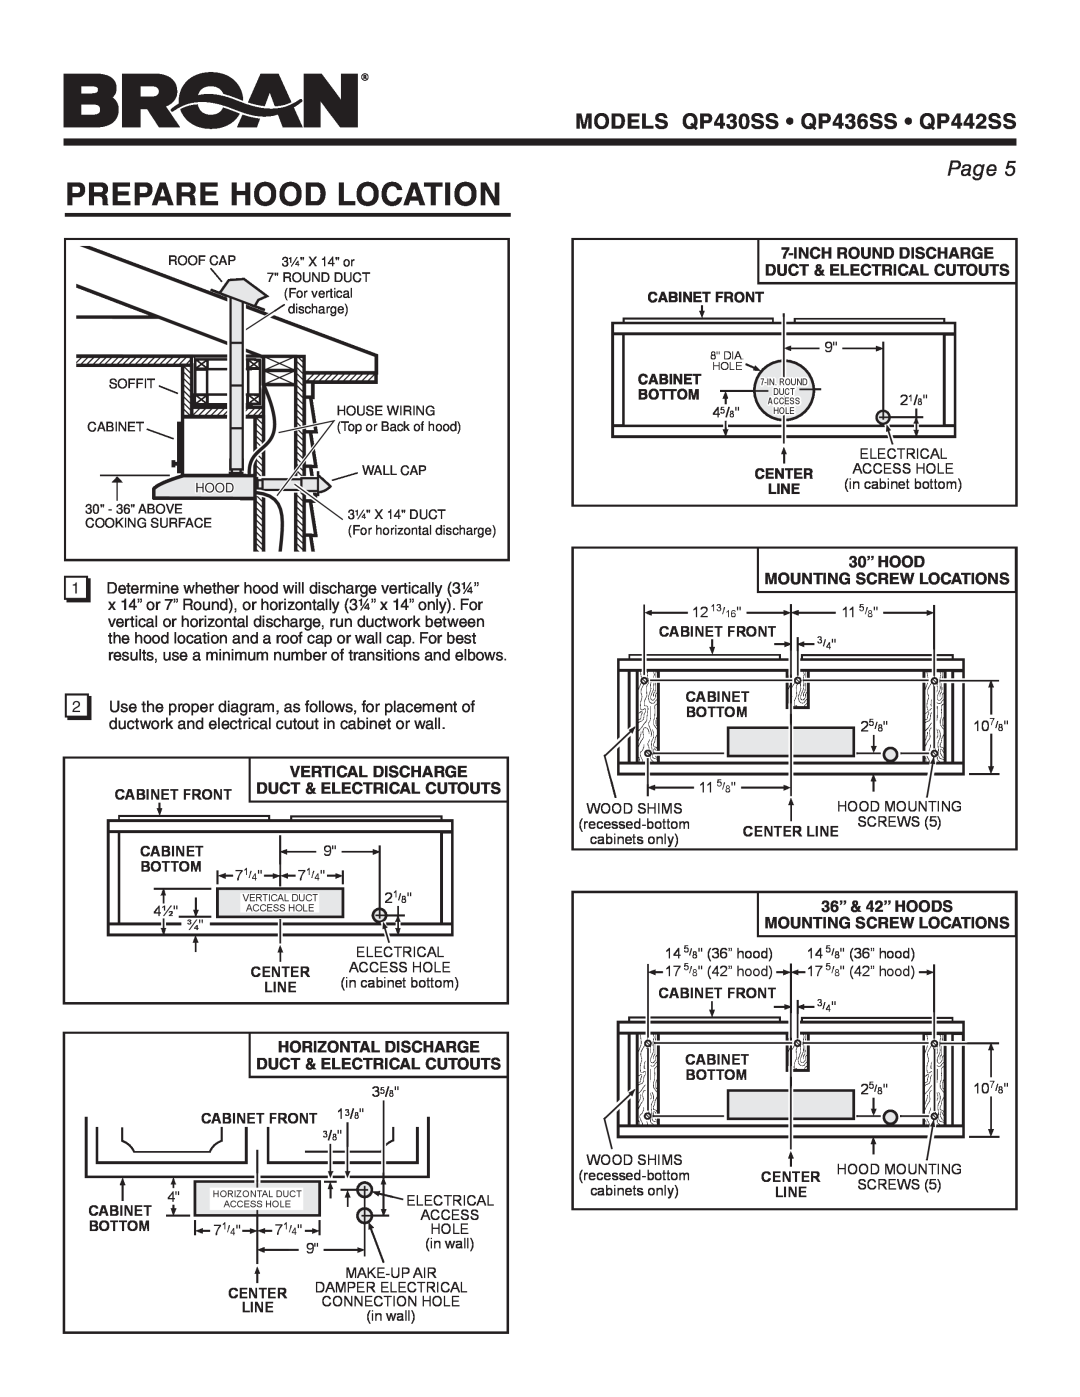 Broan QP442SS Prepare Hood Location, Inchround Discharge Duct & Electrical Cutouts, 30” HOOD, Vertical Discharge, Page 